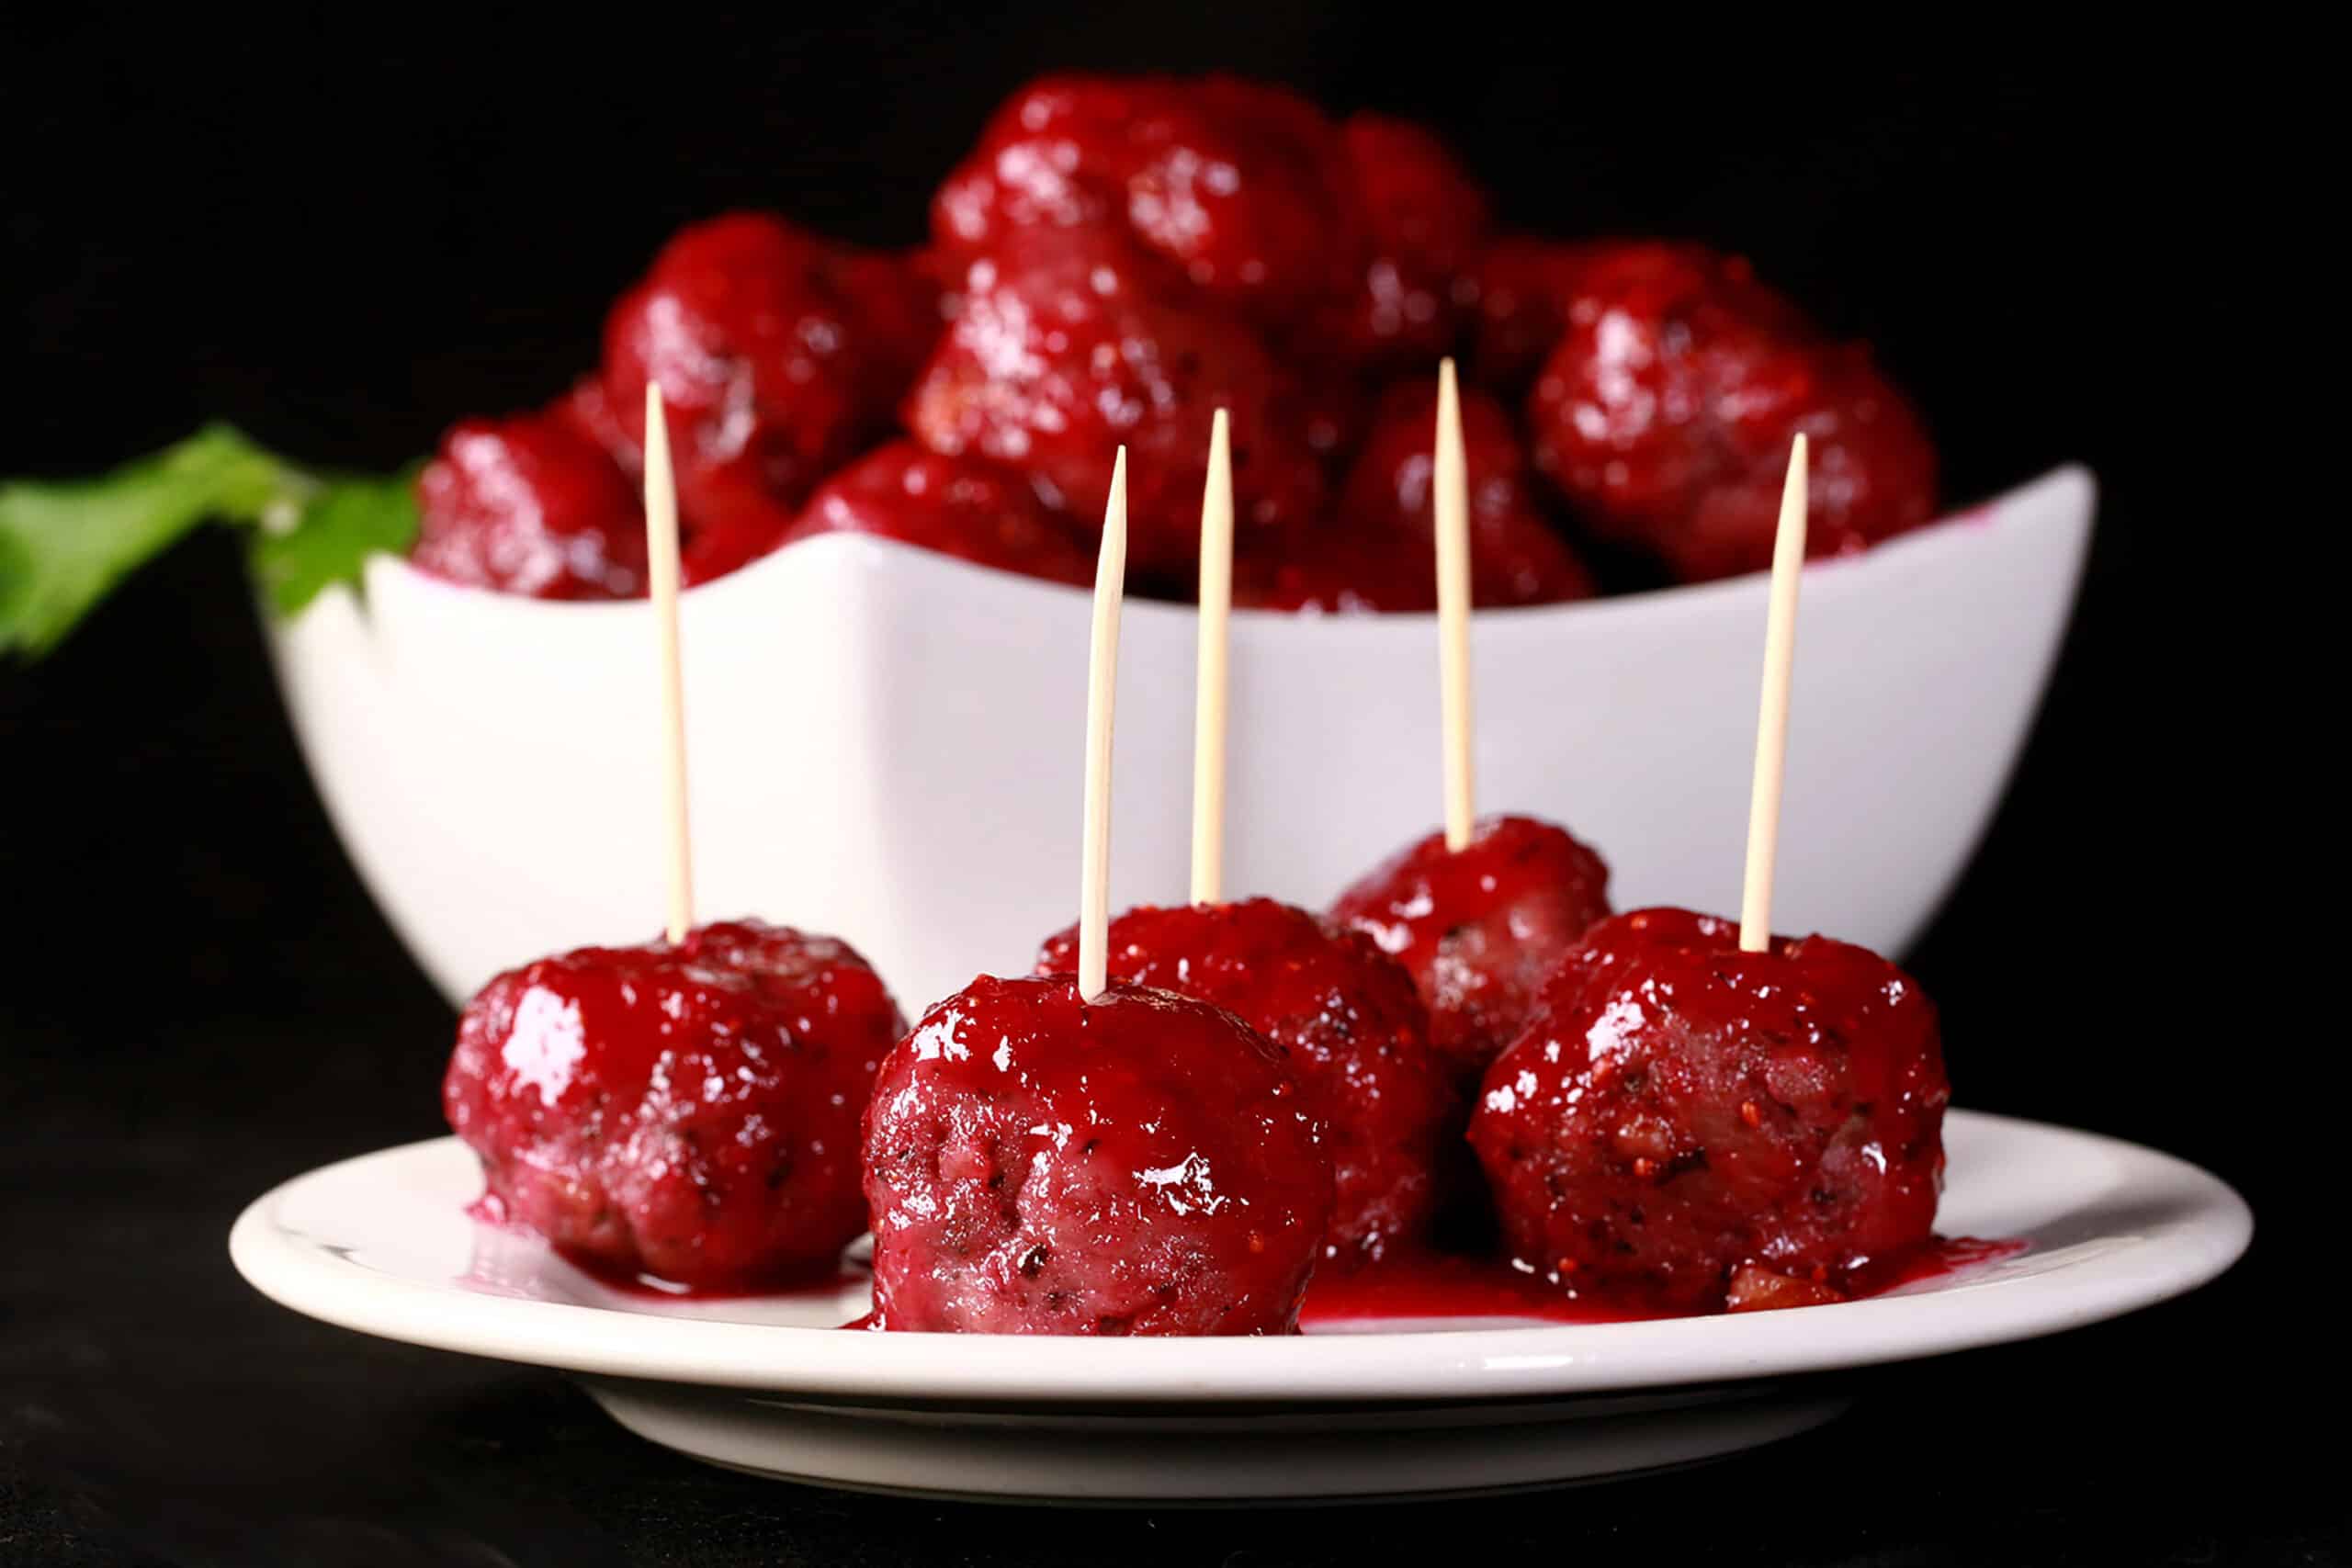 A bowl of gluten free turkey meatballs in a bright red cranberry glaze.  There are several meatballs with toothpicks on them on a plate in front of the bowl.